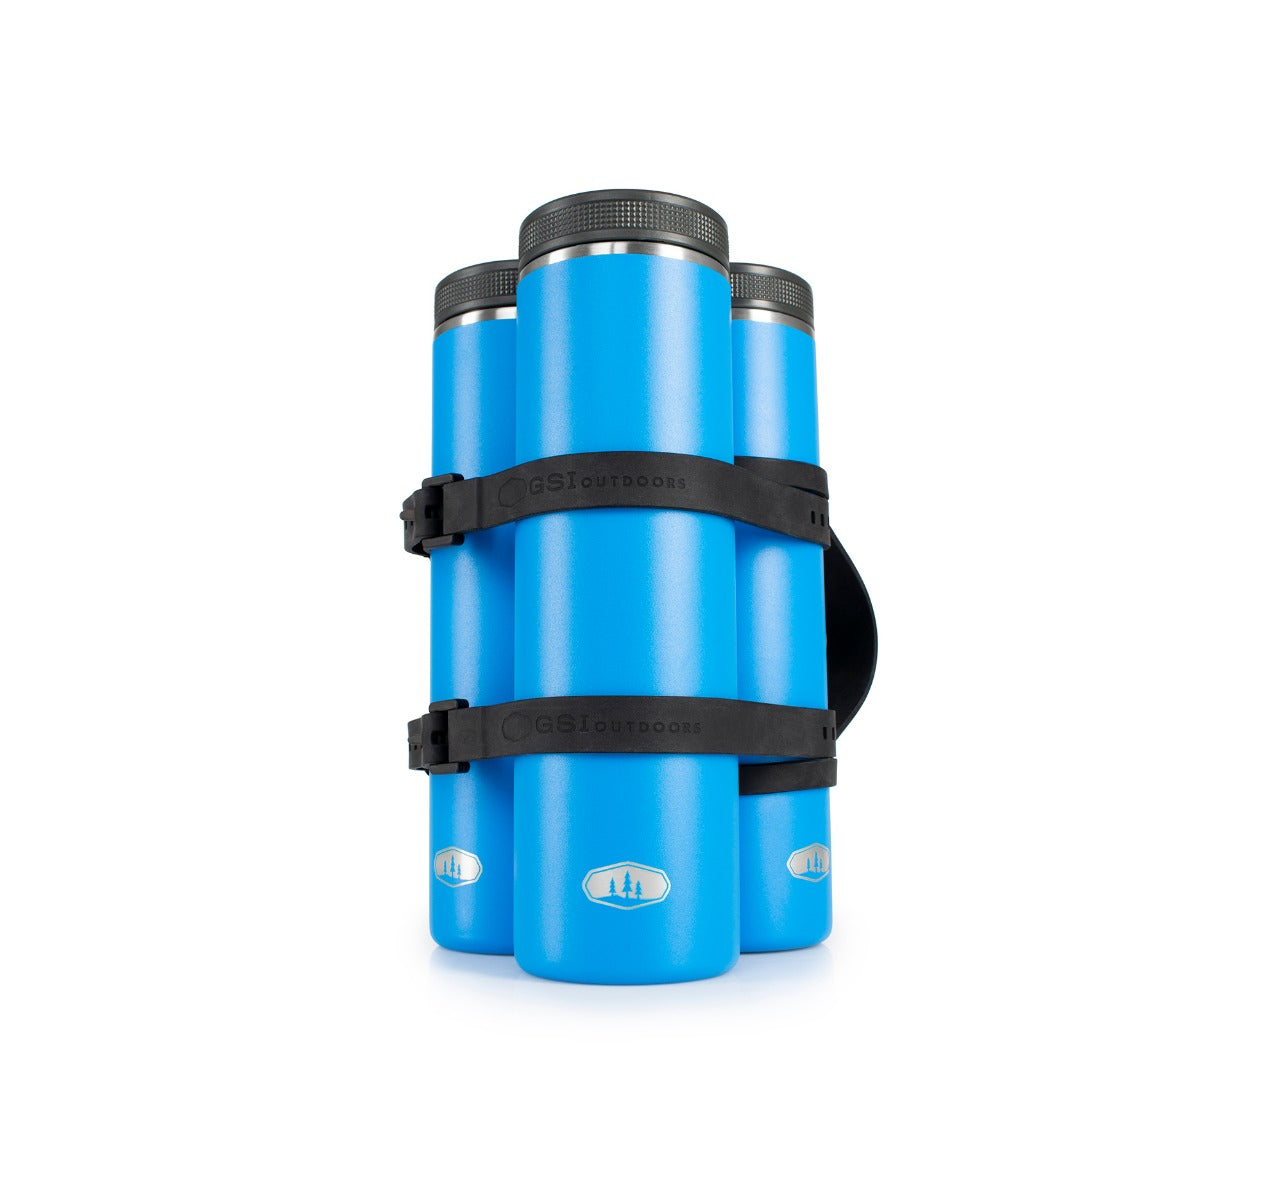 Glacier Stainless 6 Can Cooler Stack